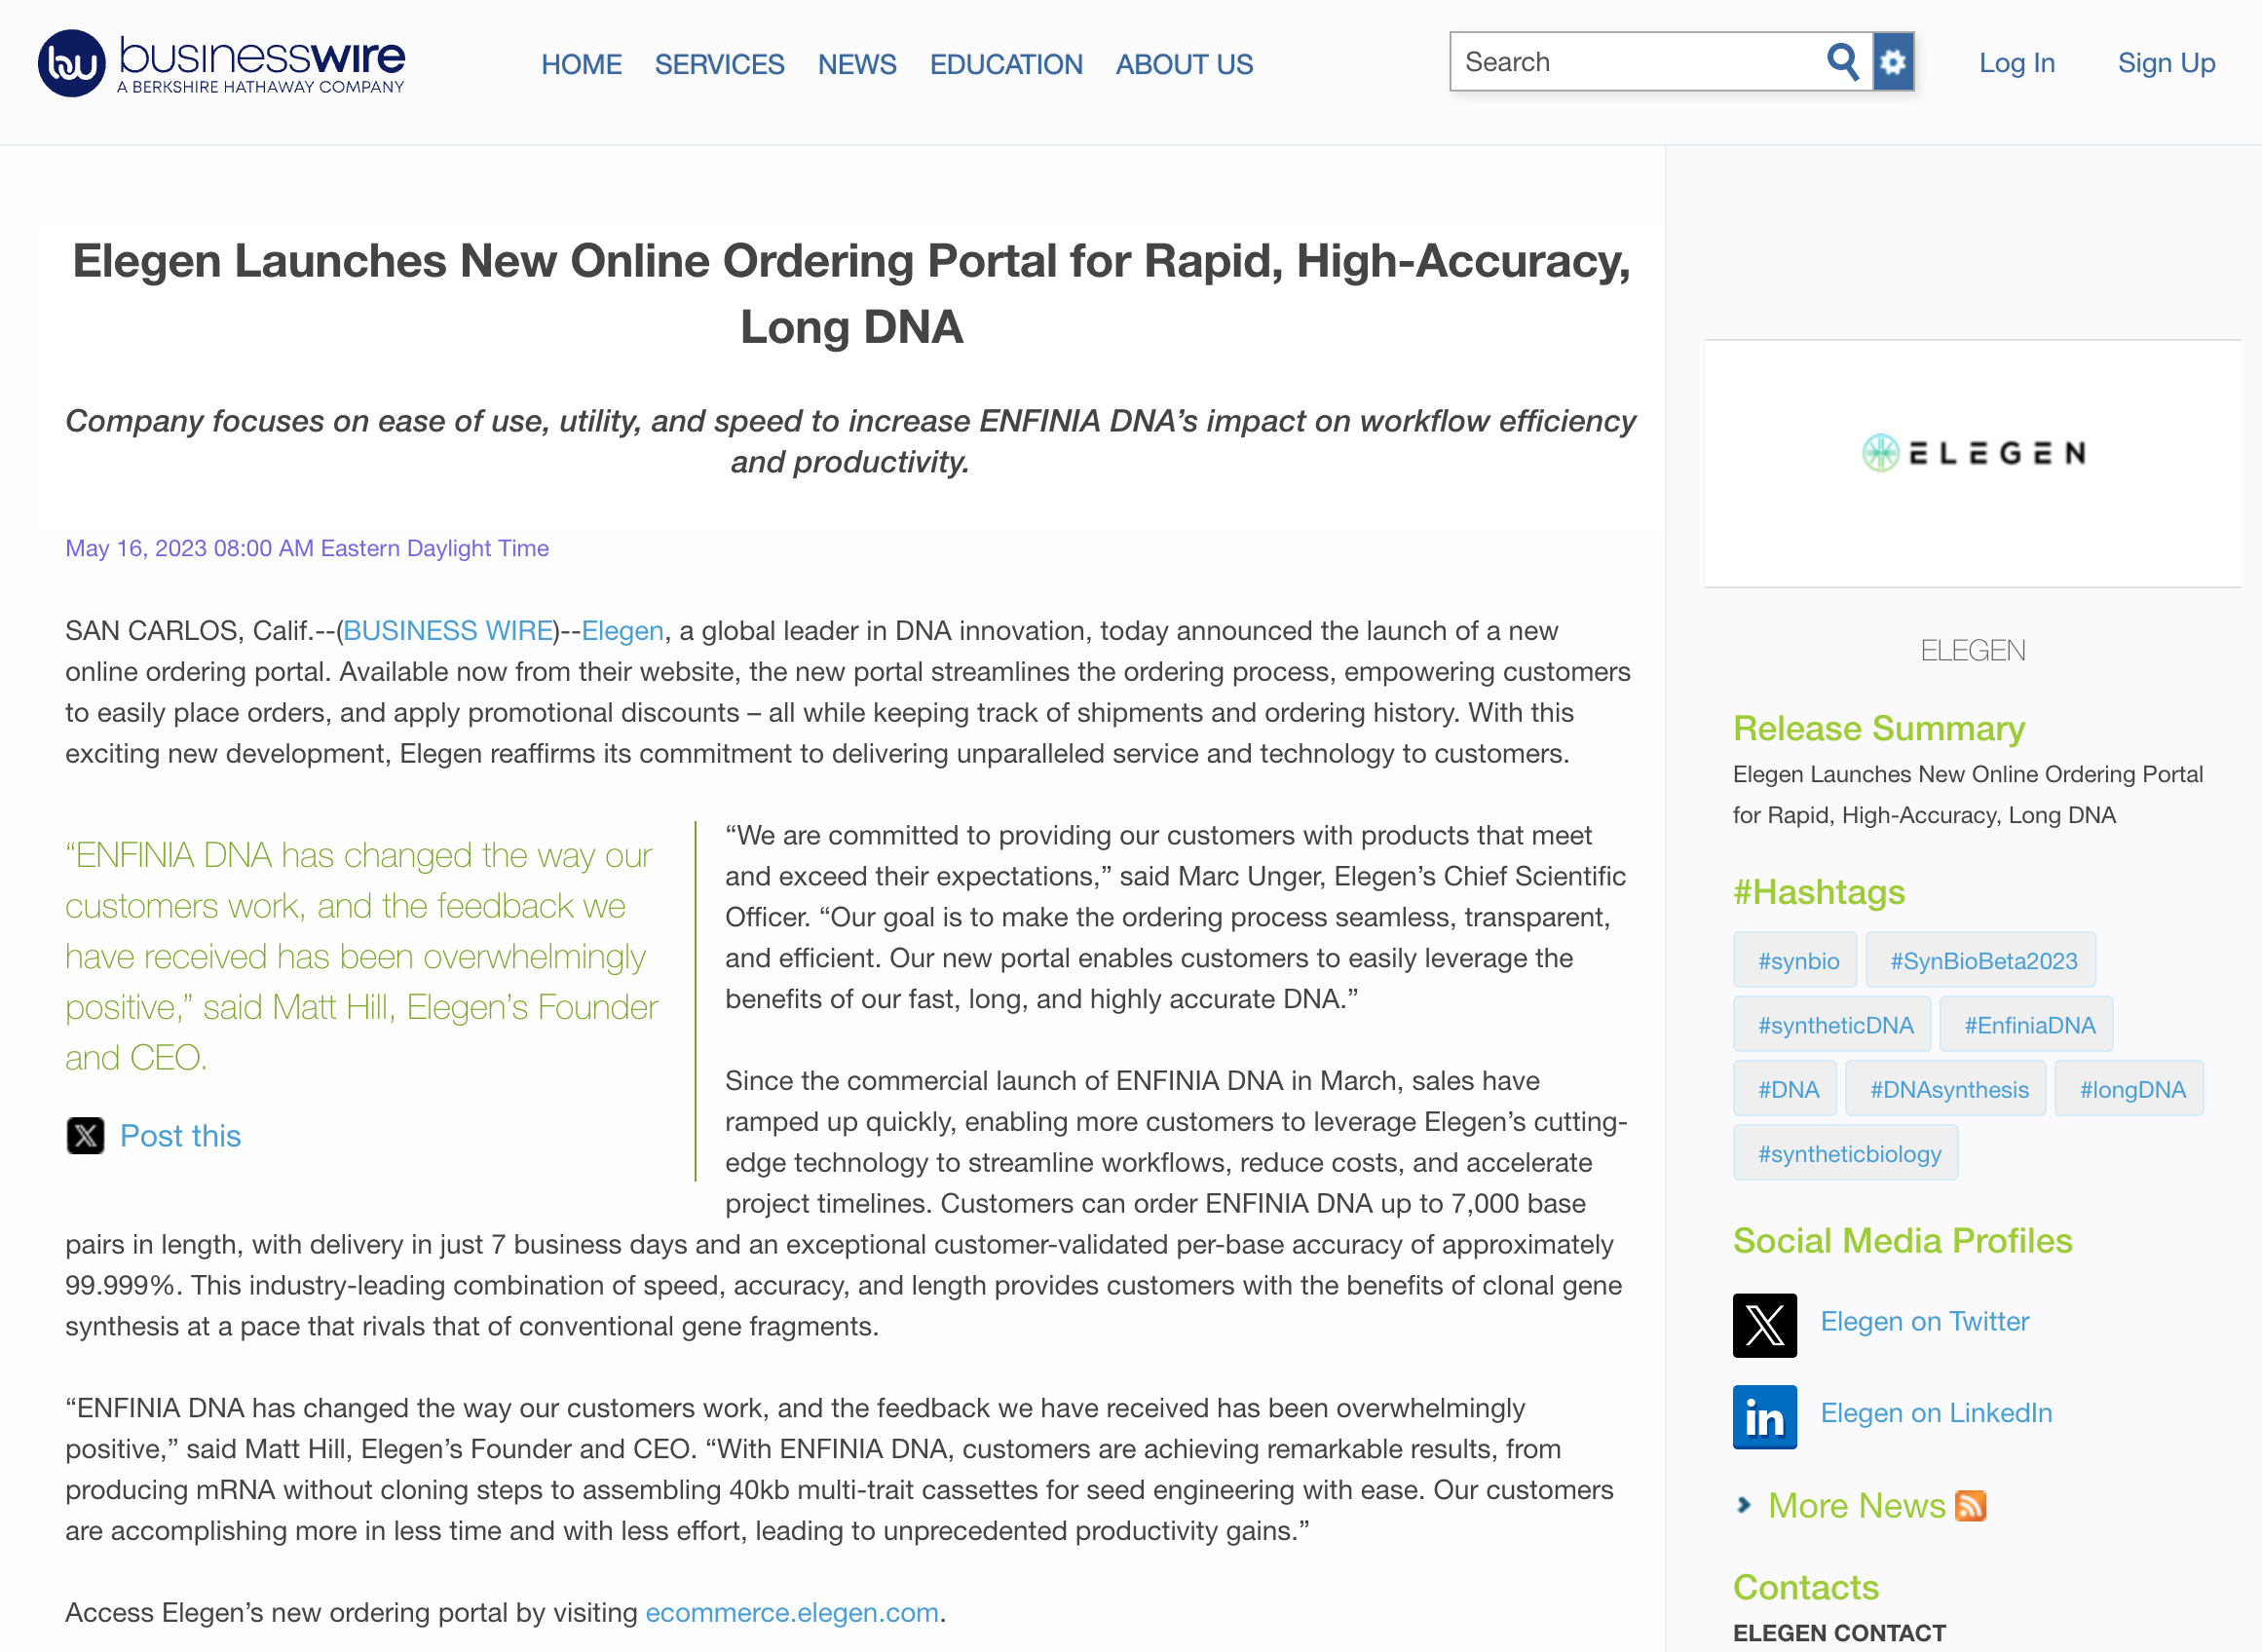 Elegen-Launches-New-Online-Ordering-Portal-for-Rapid,-High-Accuracy,-Long-DNA